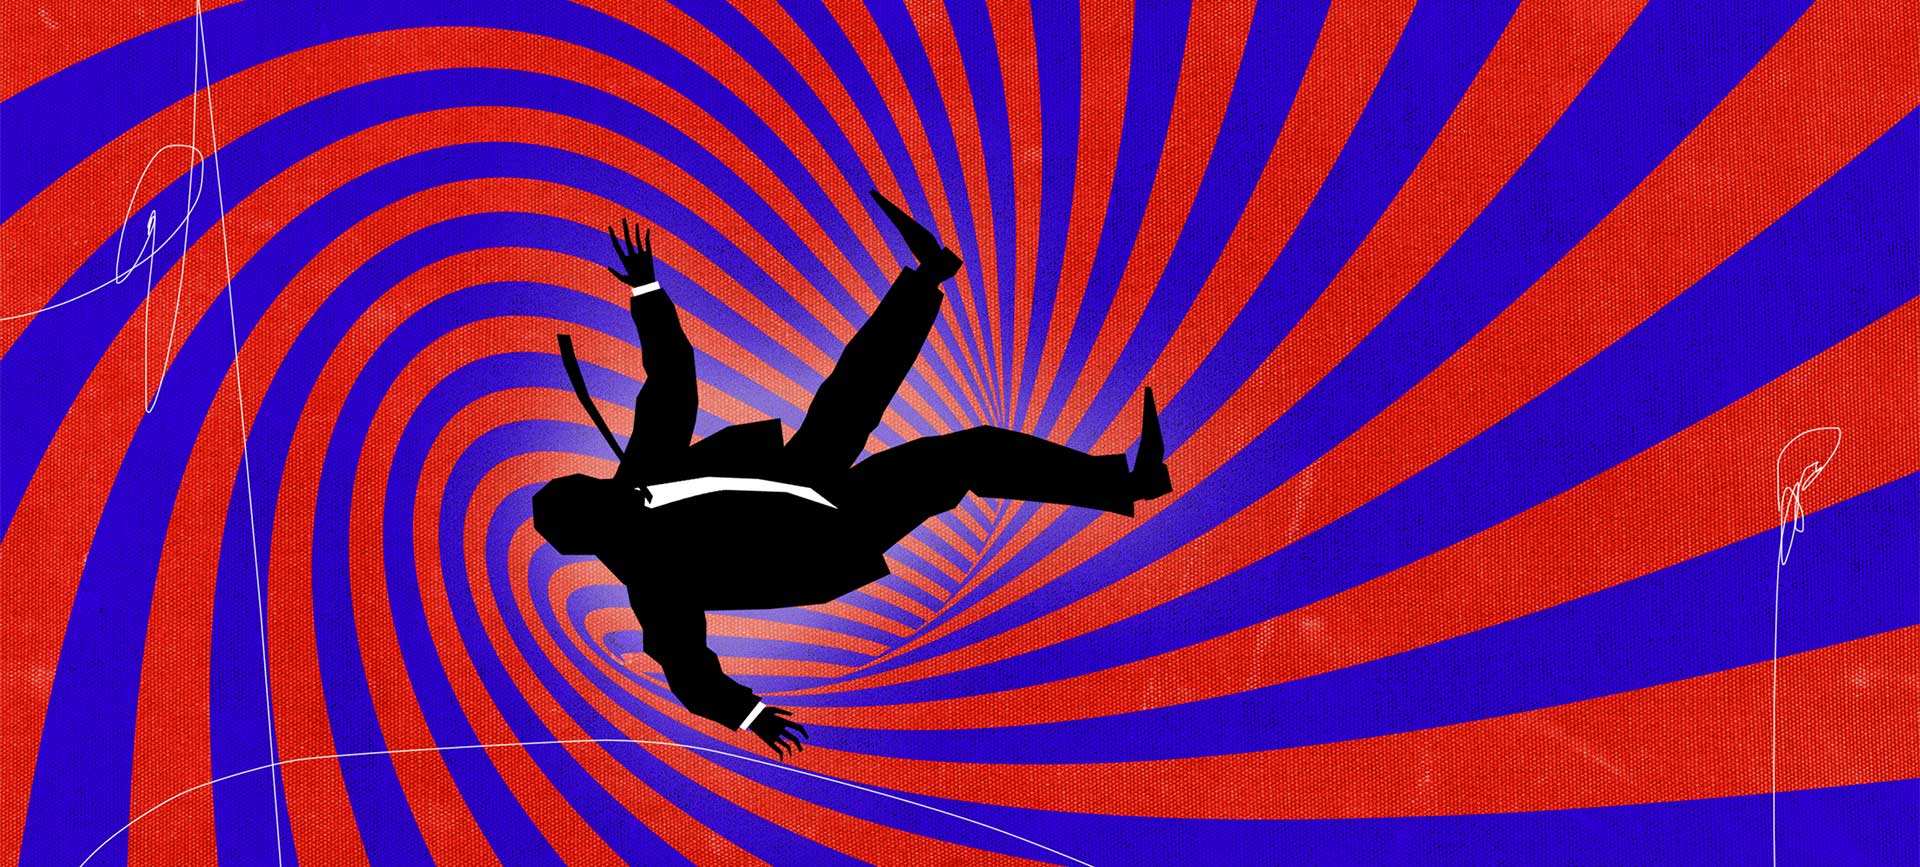 silhouette of man in suit and tie falling into striped red and blue vortex